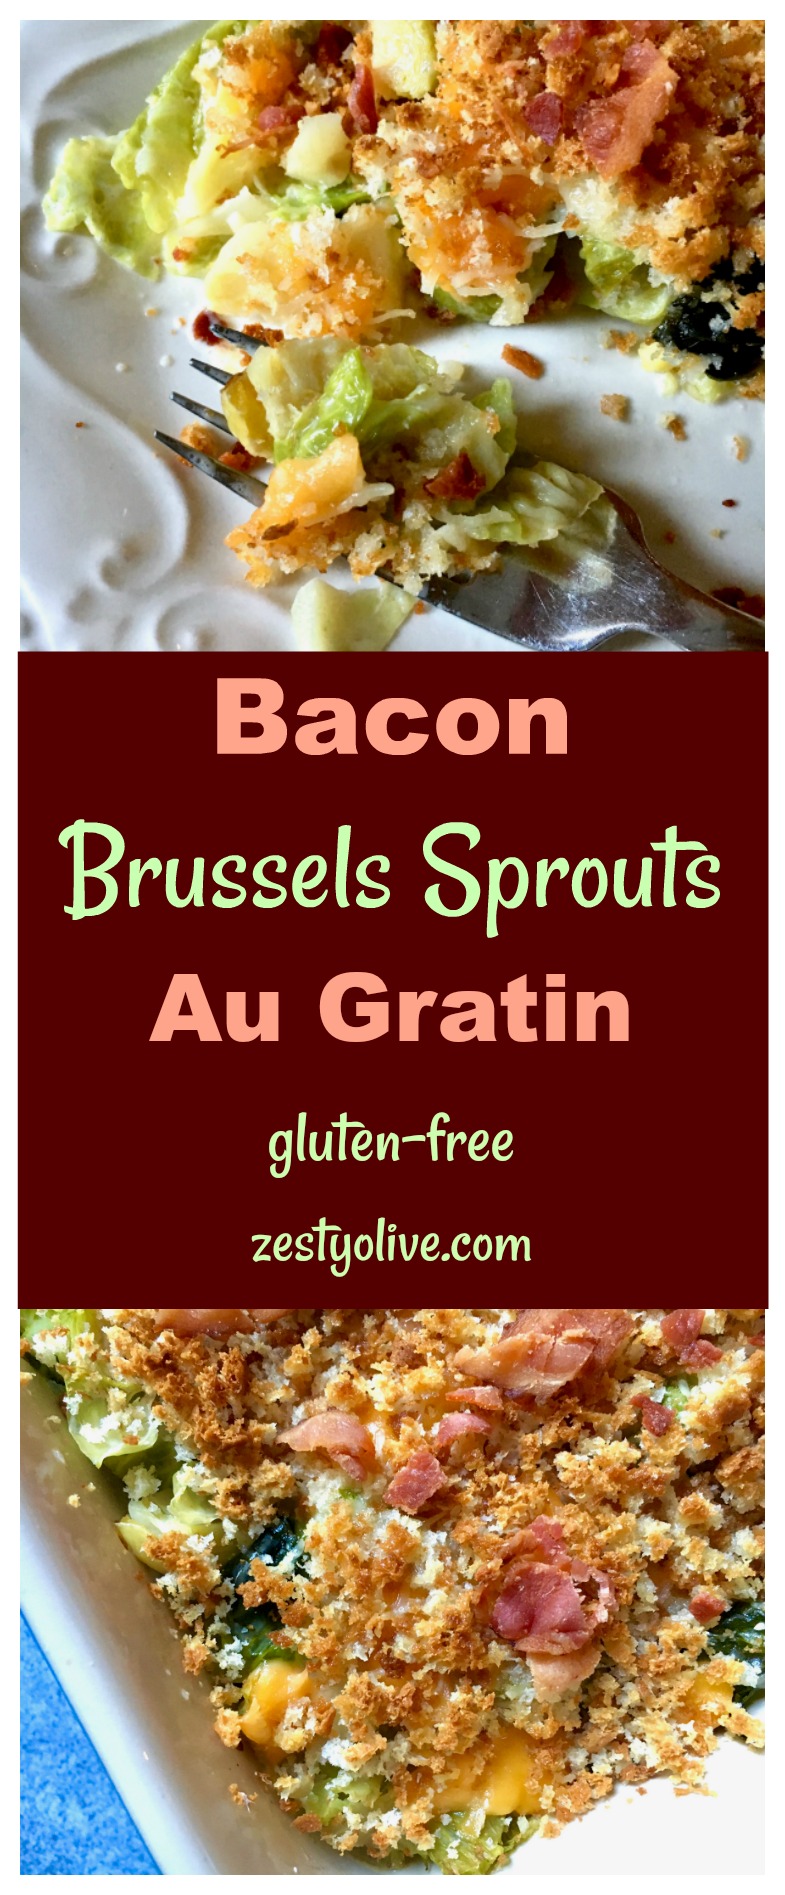 Bacon Brussels Sprouts Au Gratin makes a perfect holiday side dish for Thanksgiving and Christmas. This zesty recipe combines Brussels sprouts with two cheeses, bacon, garlic, yummy cream and a topping of breadcrumbs, which can be gluten-free if you need it to be!